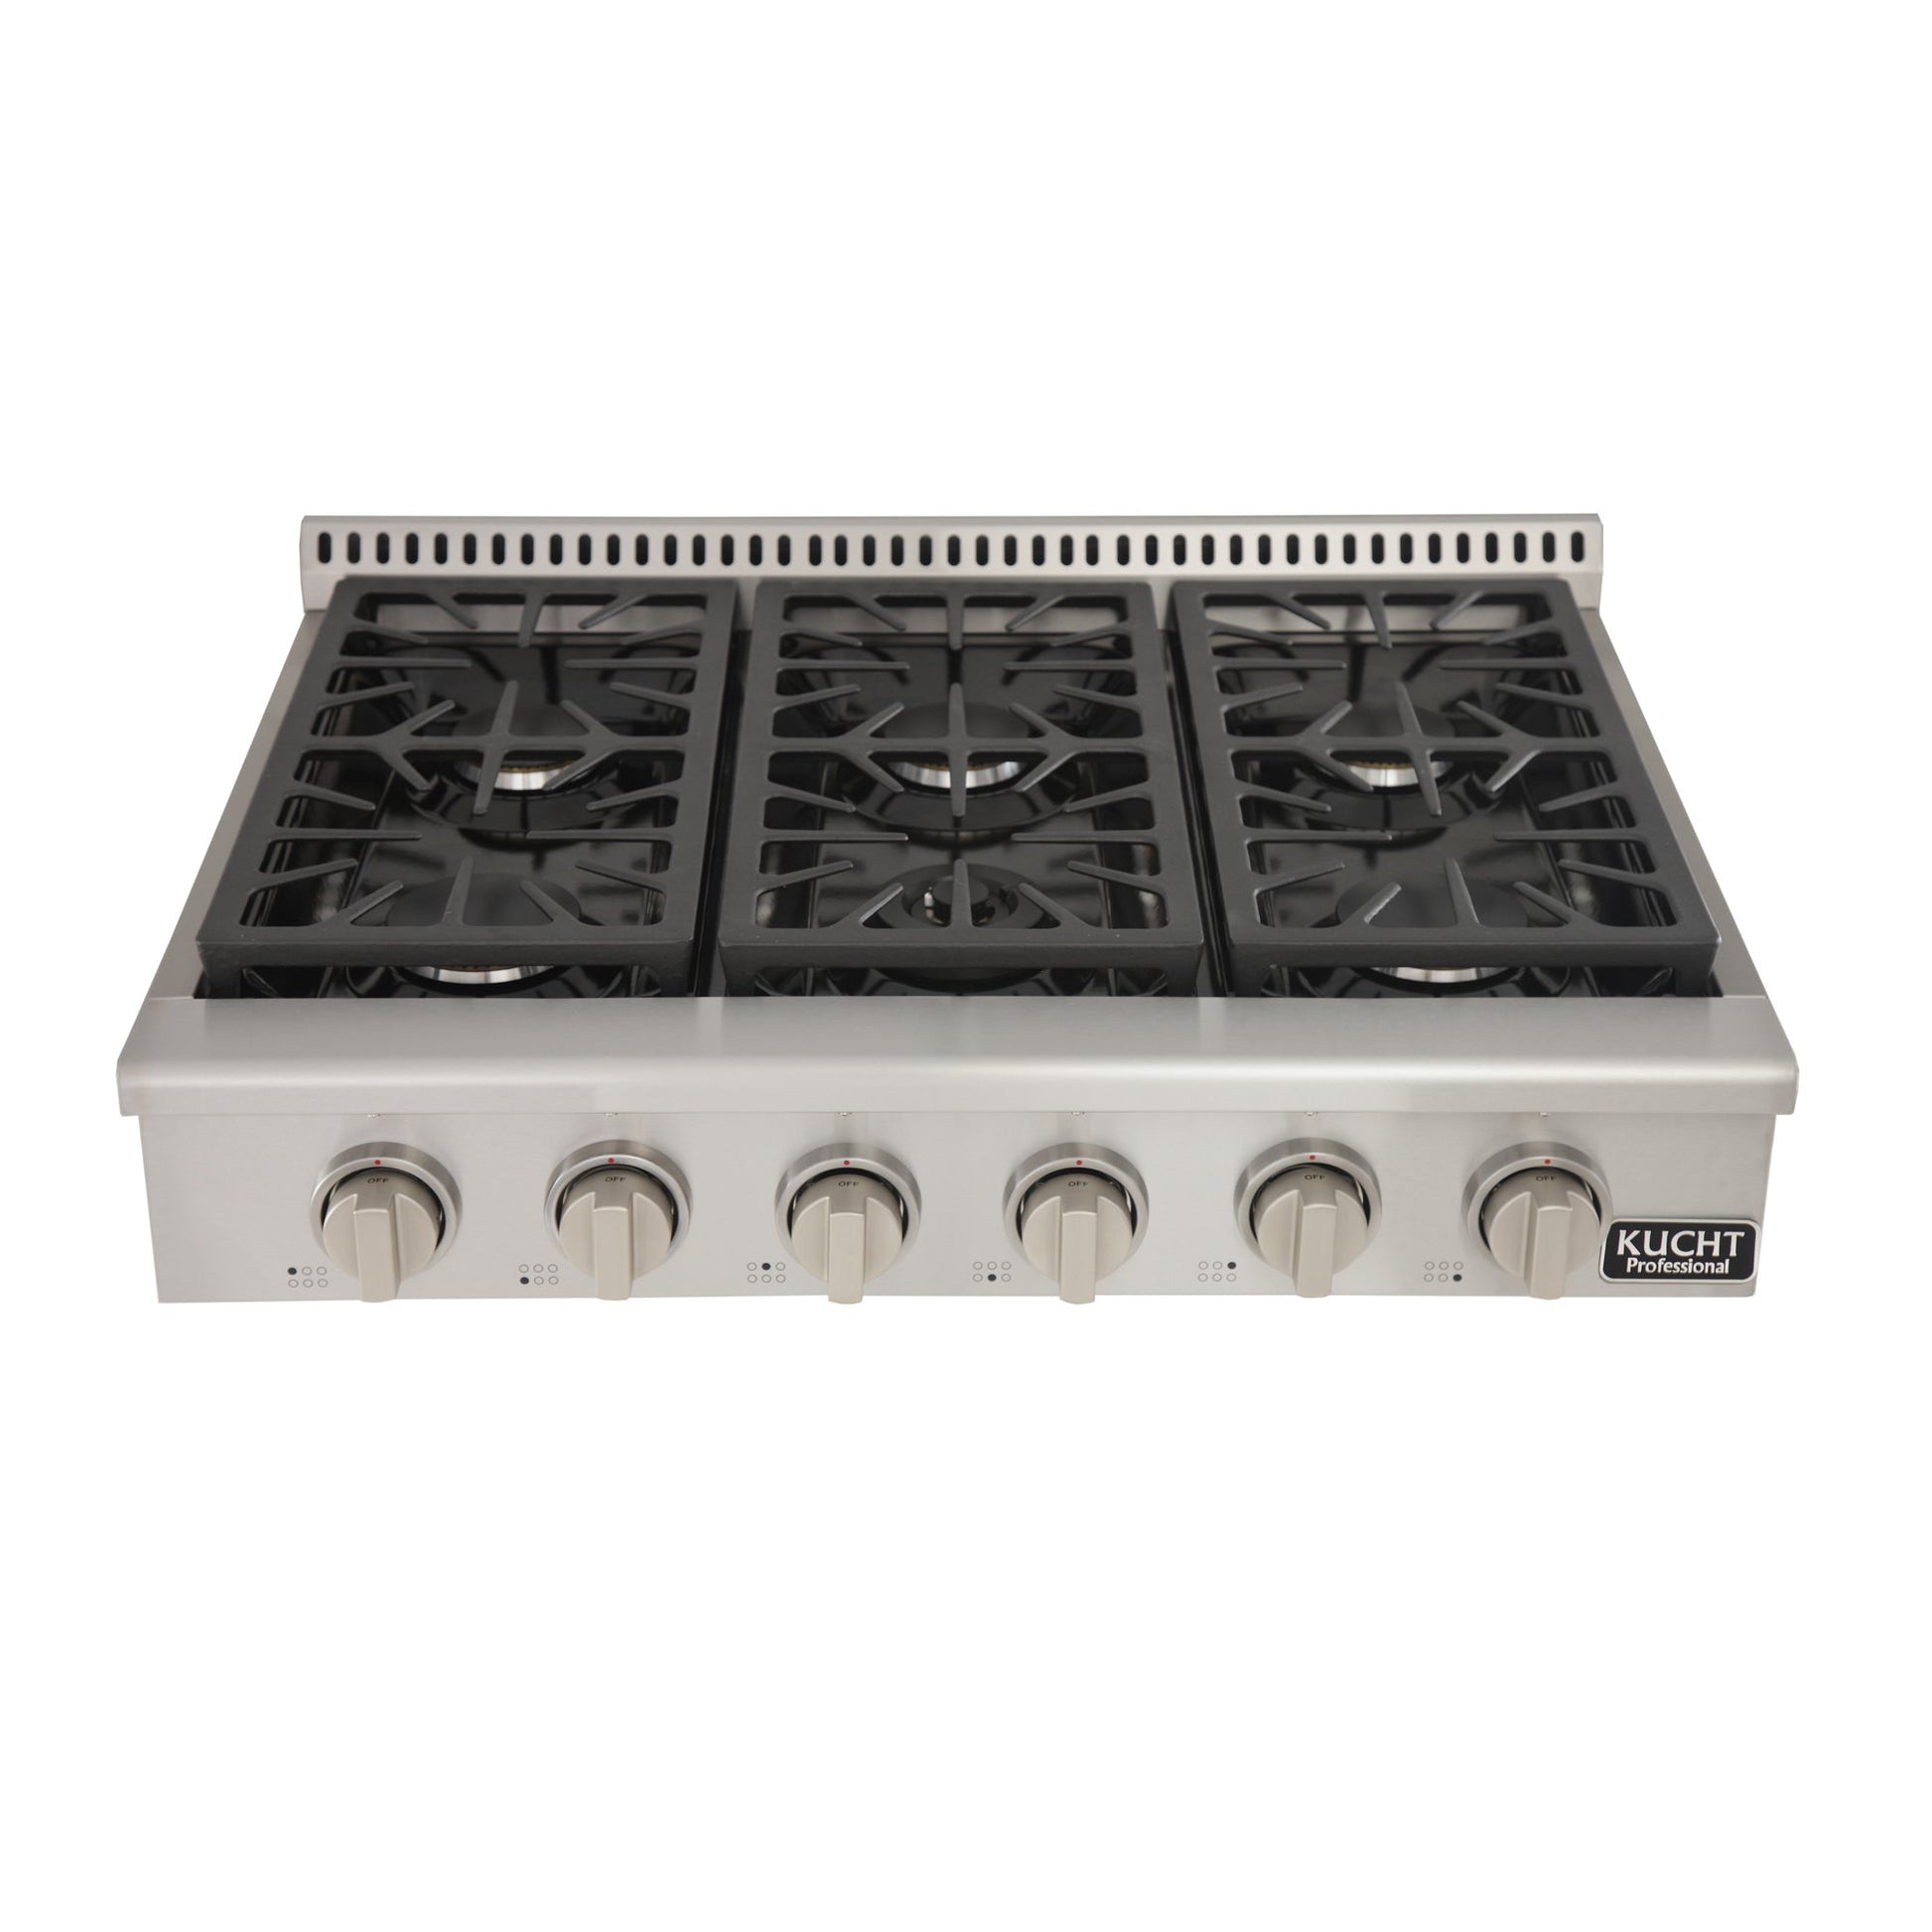 Kucht KRT Series 36" Natural Gas Range-Top With 6 Burners and Royal Blue Knobs